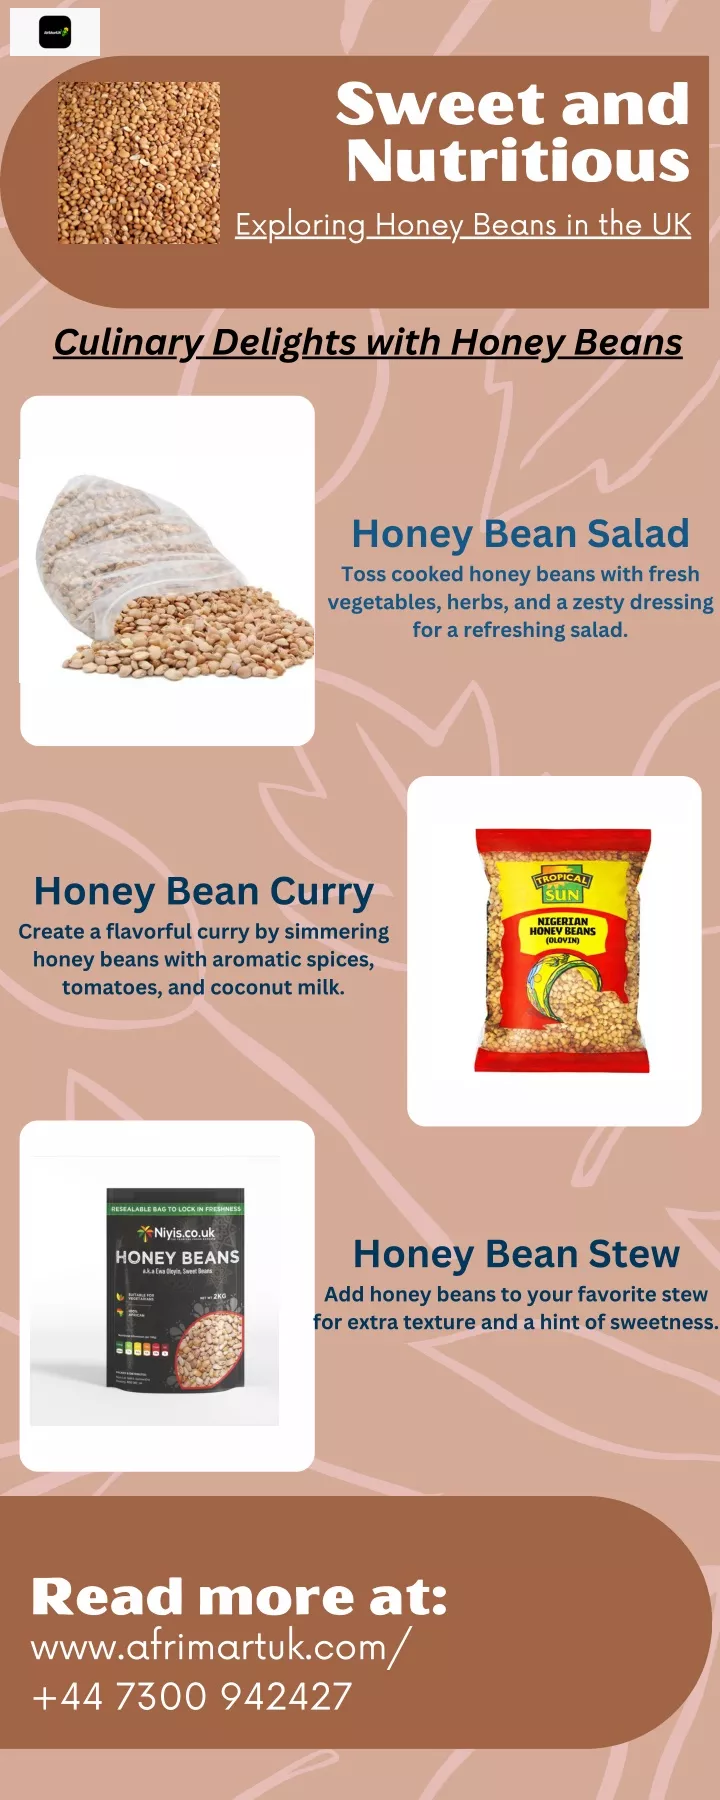 sweet and nutritious exploring honey beans